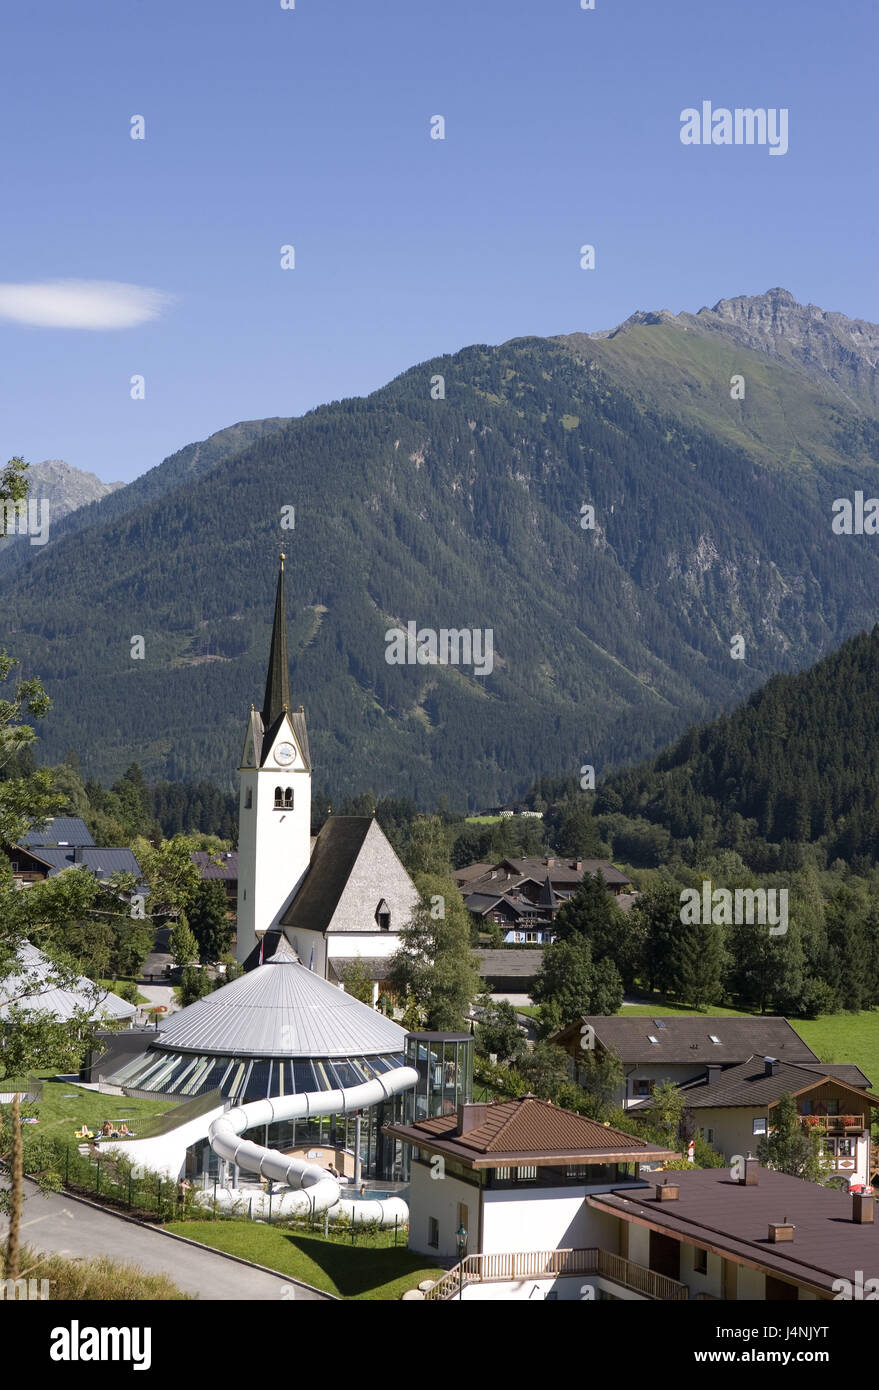 Austria, Salzburg country, wood in the Pinzgau, local view, church, national park parish, mountain landscape, mountains, place, houses, residential houses, parish church, swimming-pool, destination, tourism, Stock Photo